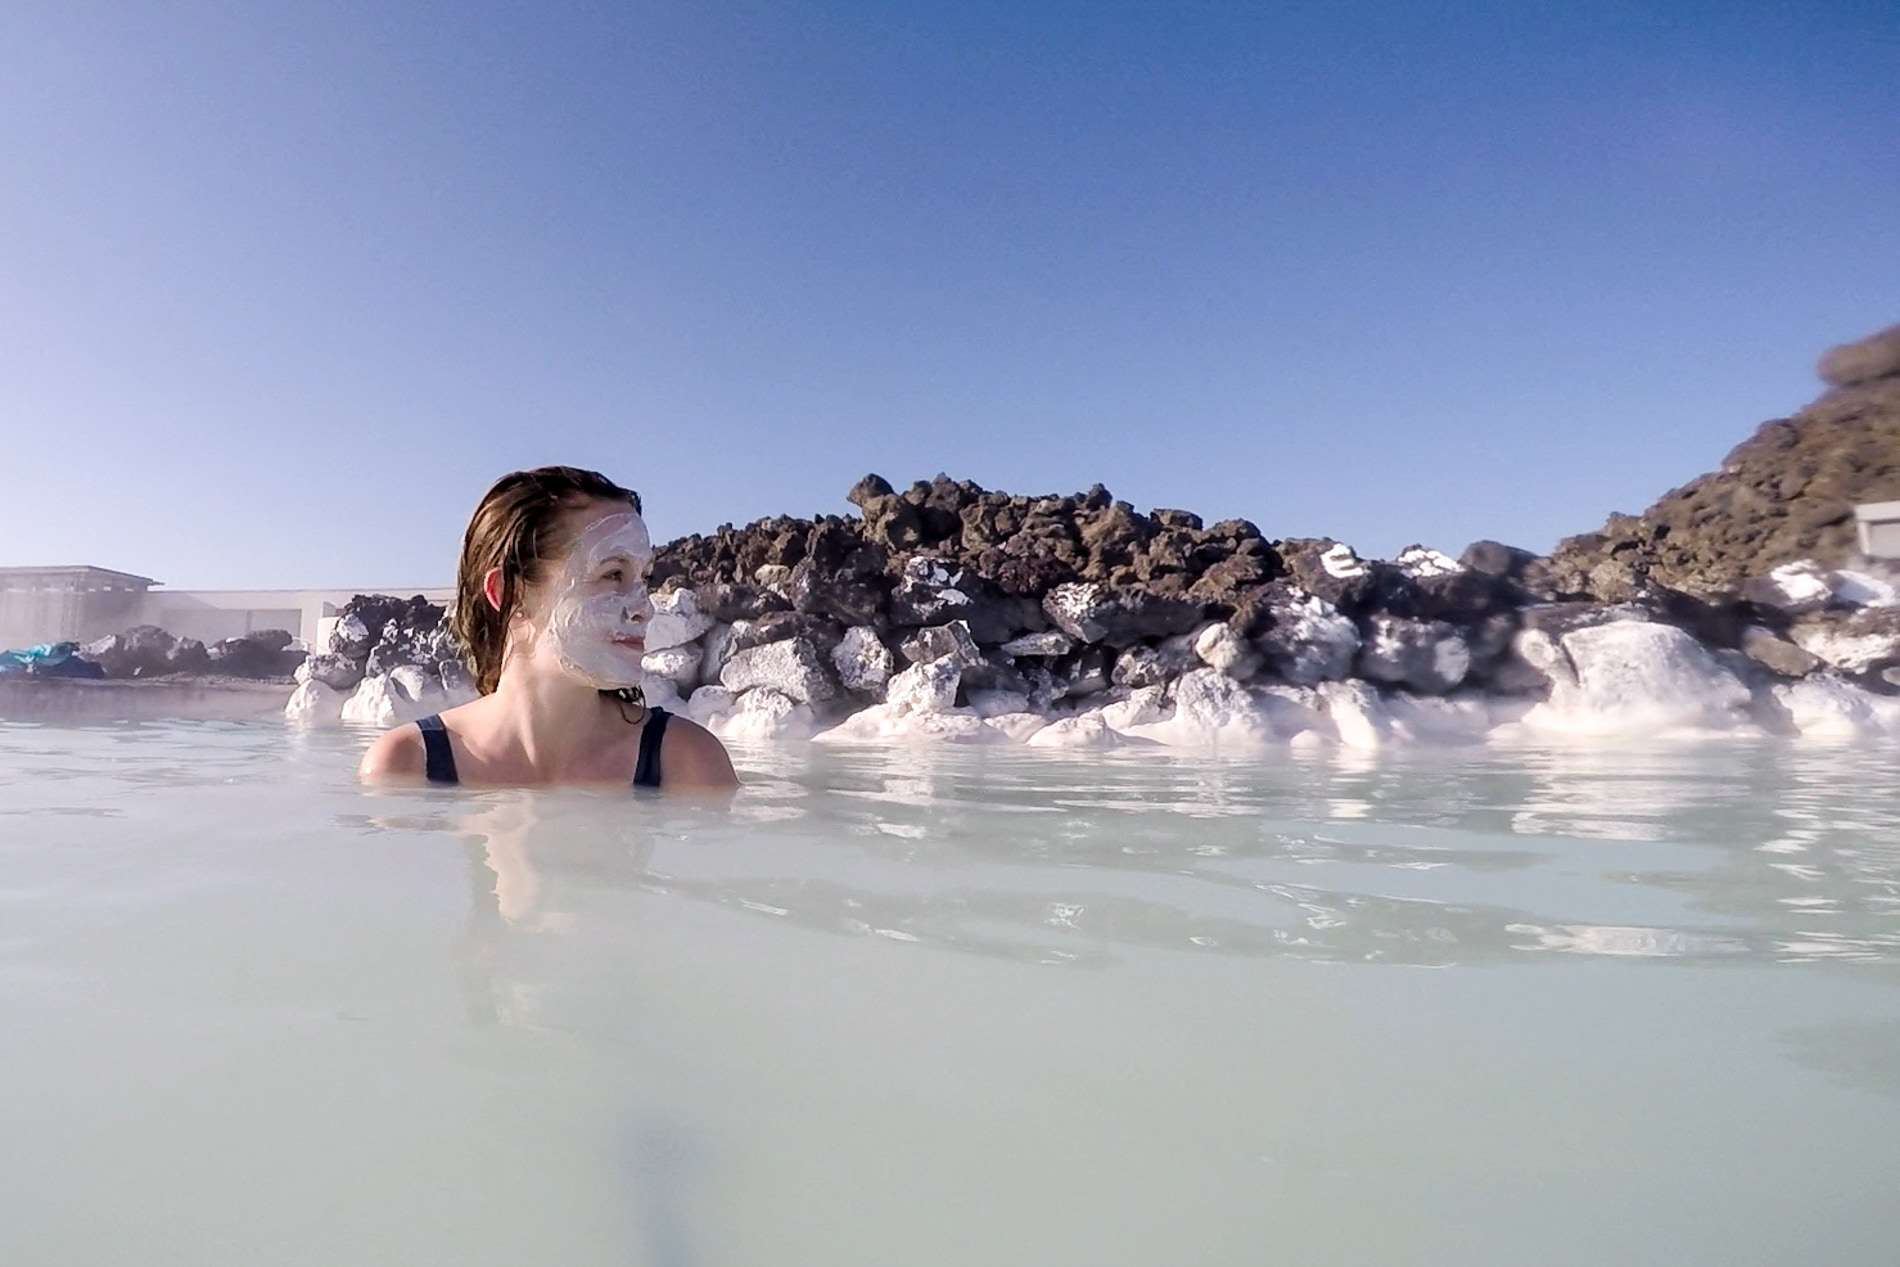 A woman, wearing a white clay face mask, looks ti the side as she submerges herself in the light waters of the Blue Lagoon in Iceland. Behind her are black rocks covered in a salt-like substance.